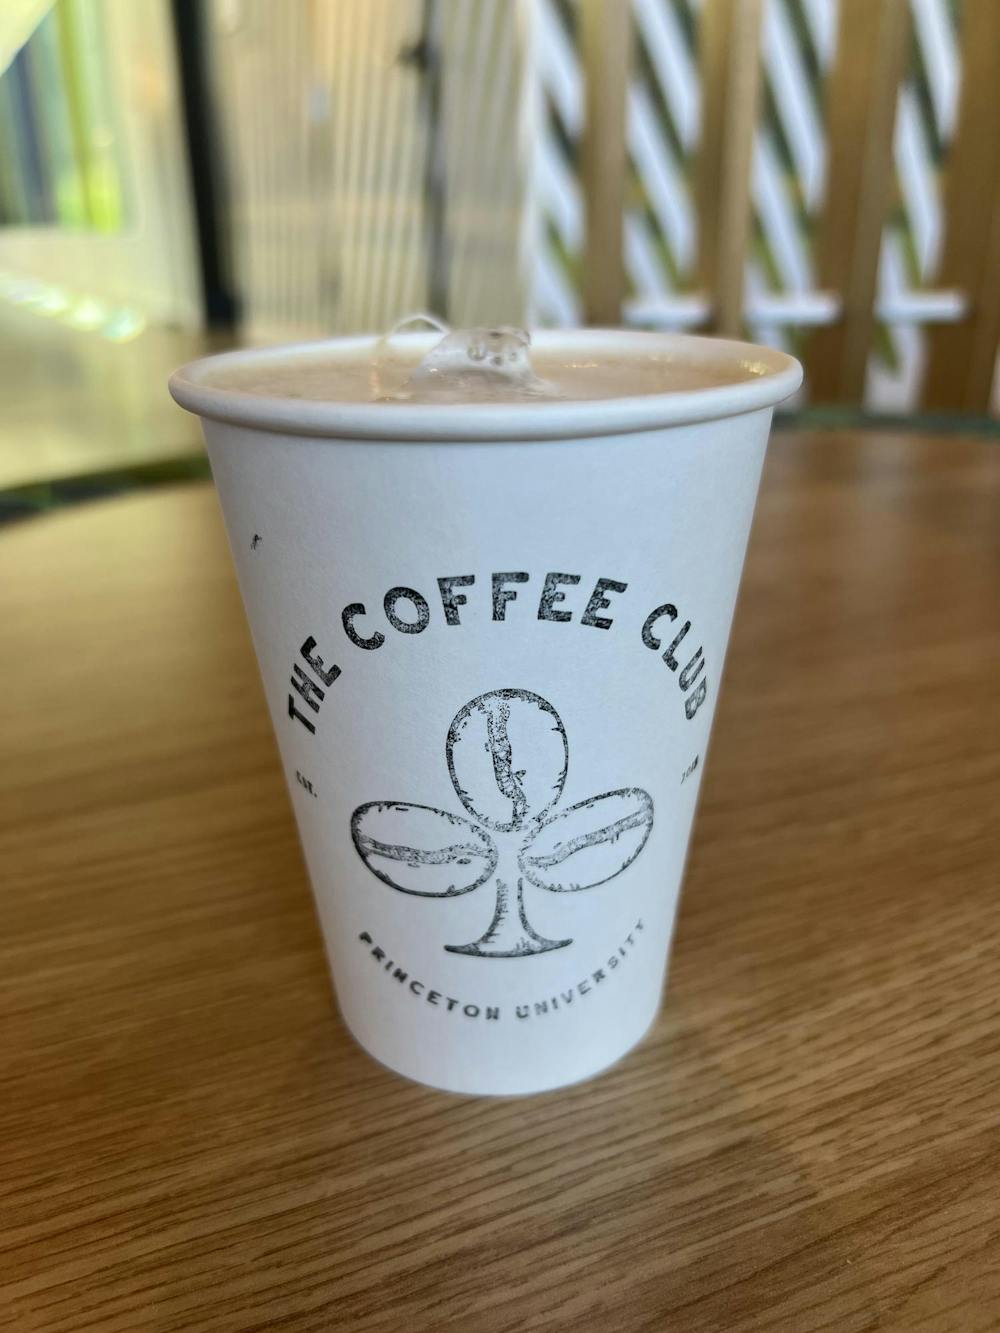 A close-up photo of a coffee cup with the words "The Coffee Cup" and coffee beans printed on the side of the cup.